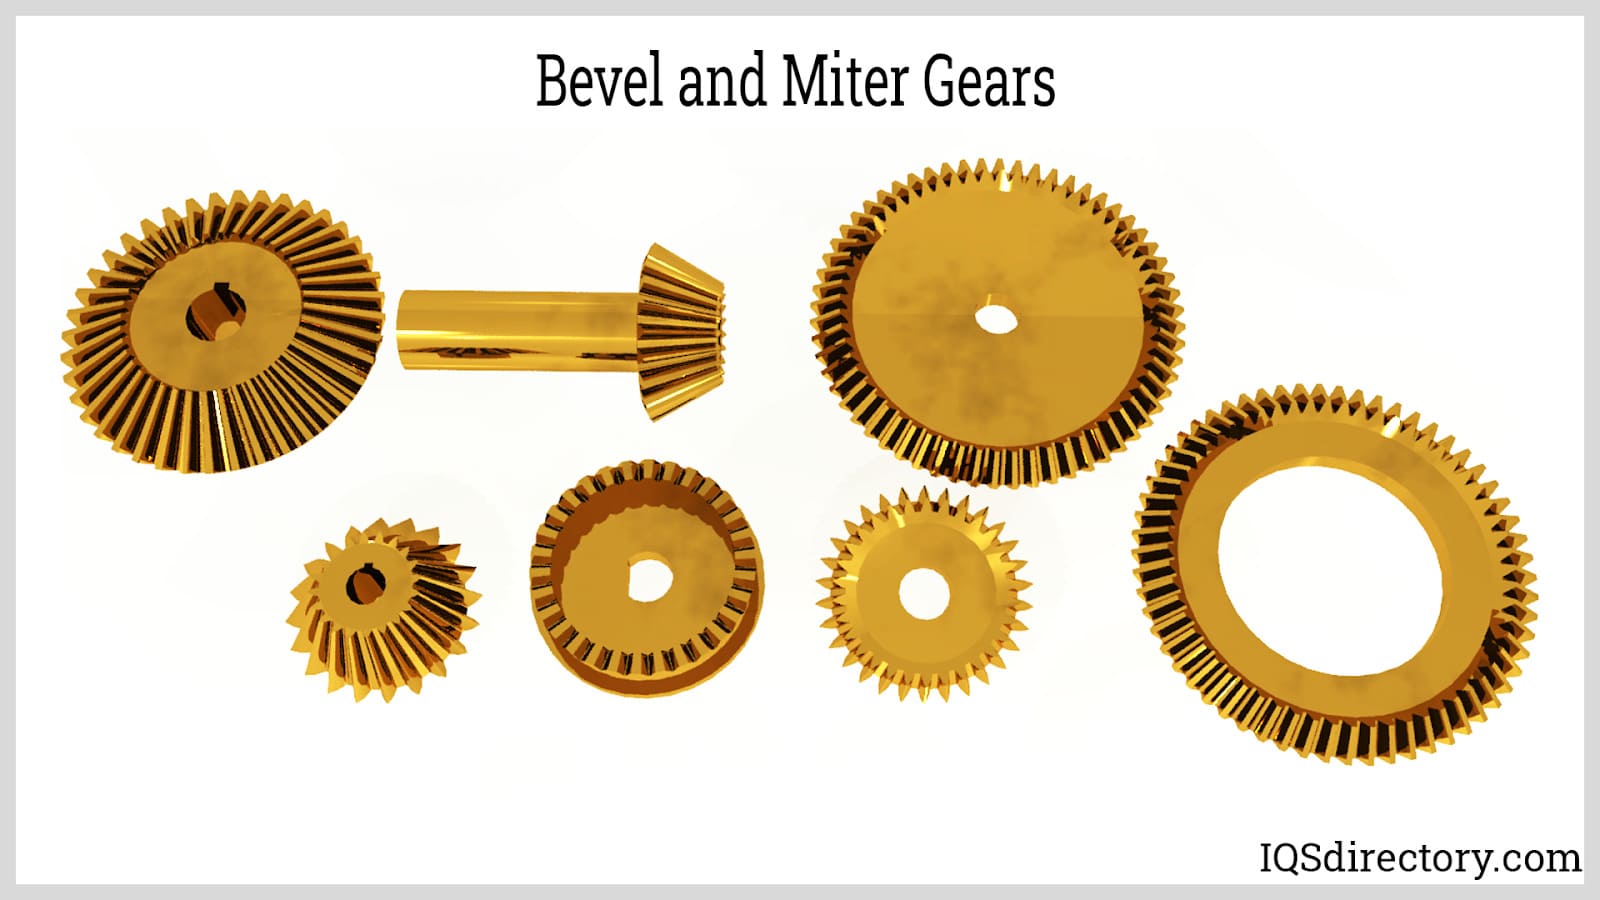 Bevel and Miter Gears